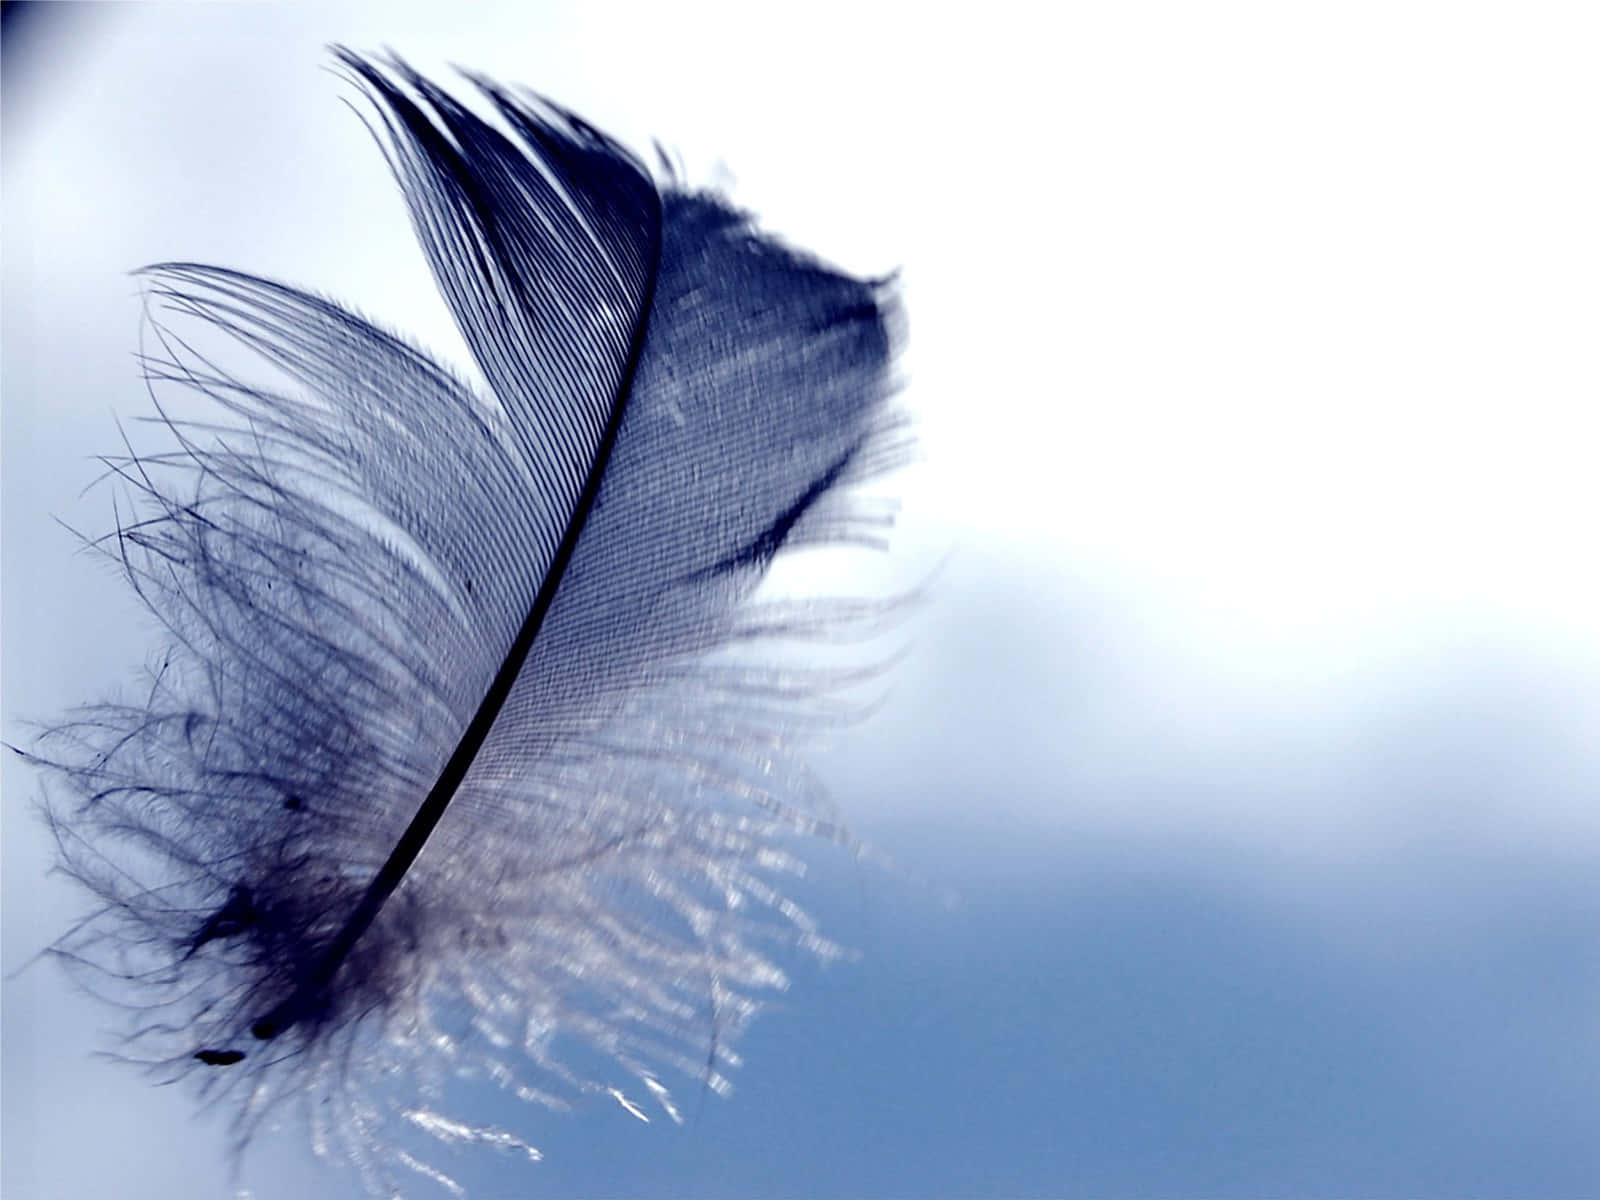 What Can You Learn From a Feather?